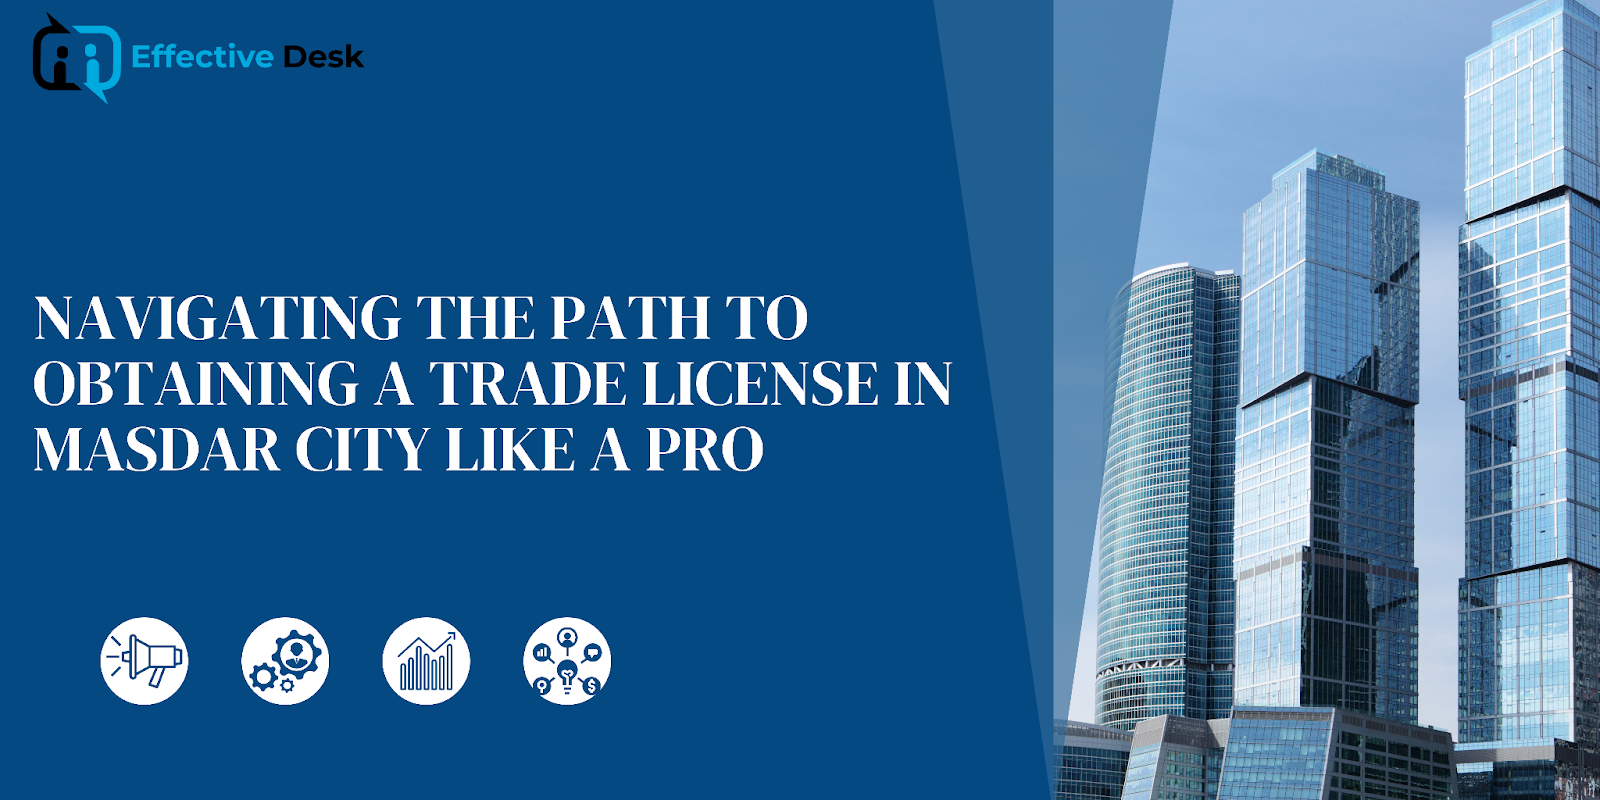 Navigating the Path to Obtaining a Trade License in Masdar City Like a Pro
